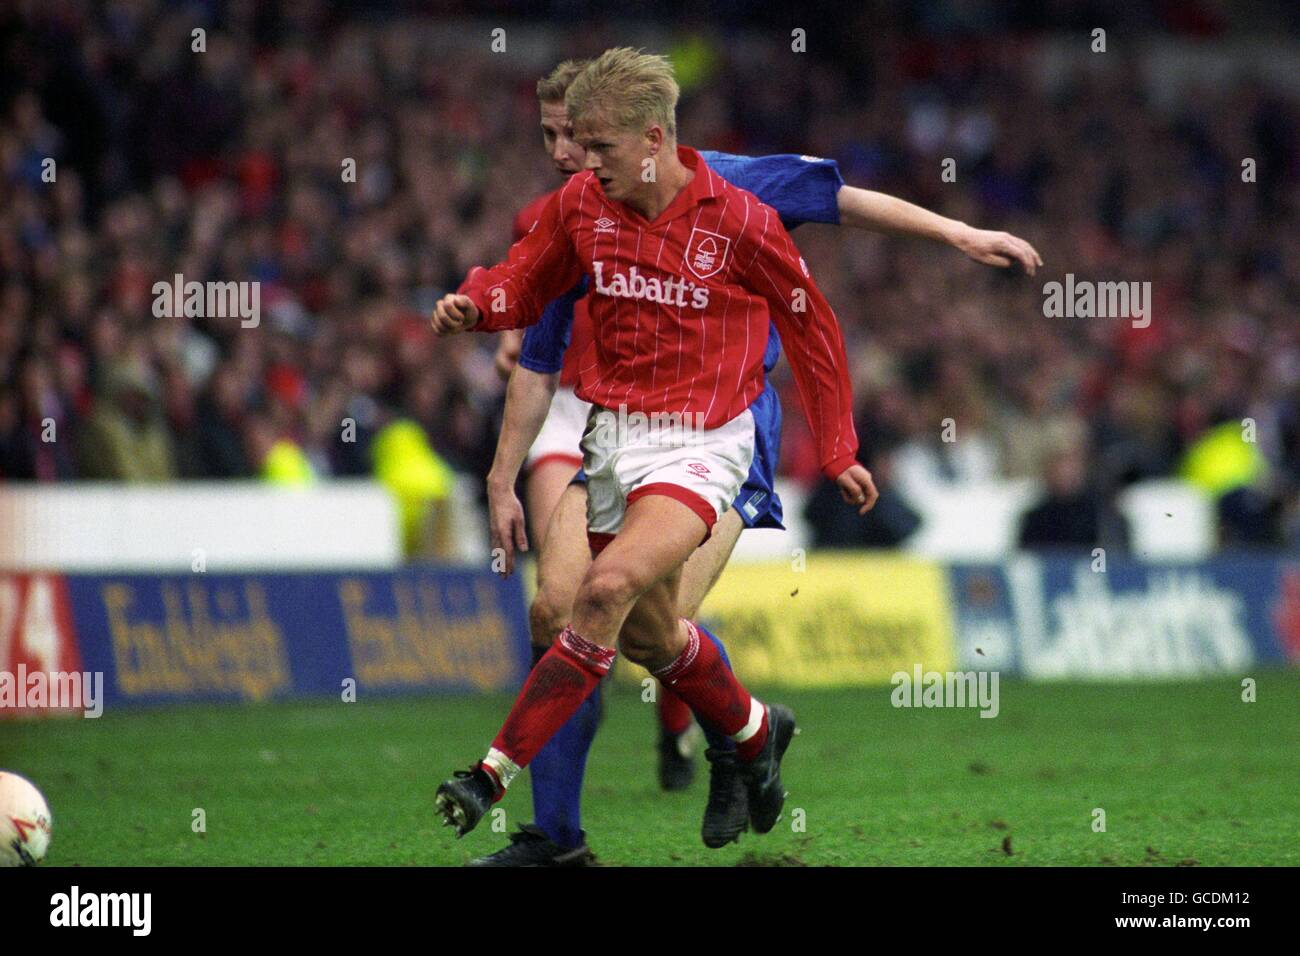 Soccer - Endsleigh League Division One - Nottingham Forest v Leicester City - City Ground. Nottingham Forest's Alf Inge Haaland under pressure from Leicester City's Iwan Roberts. Stock Photo